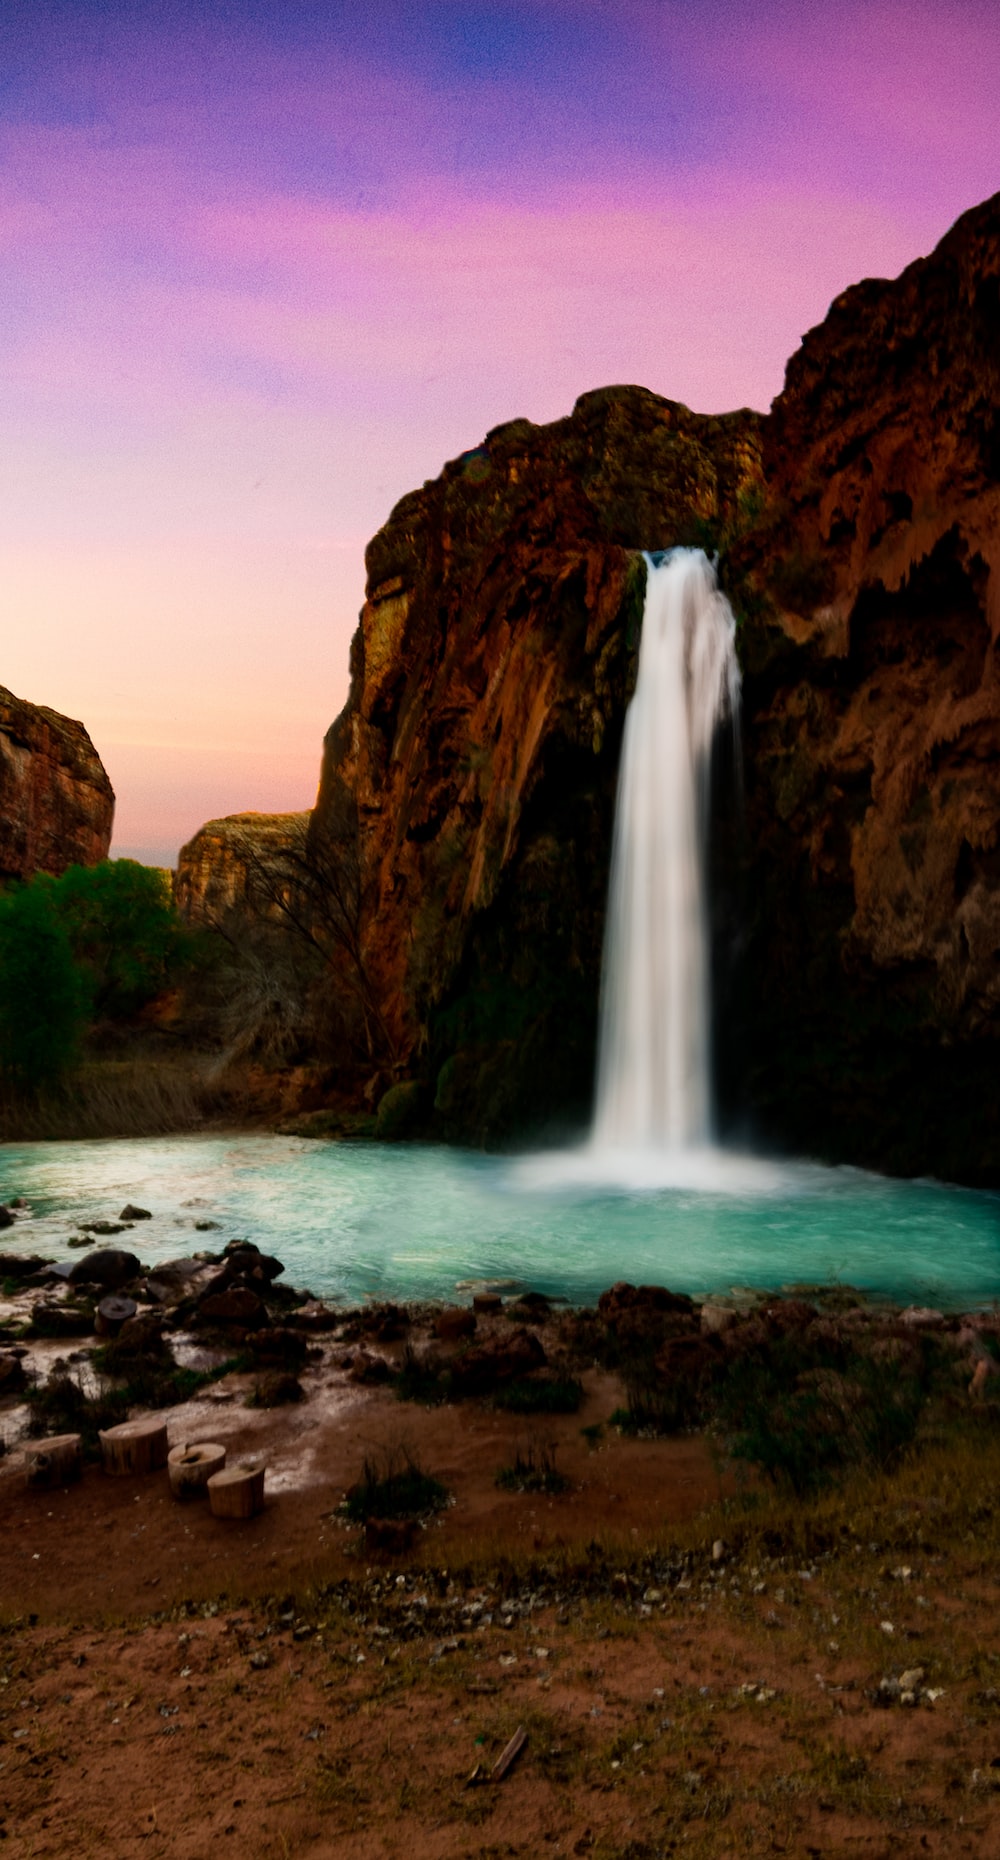 Waterfall pouring on body of water photo â free rock image on